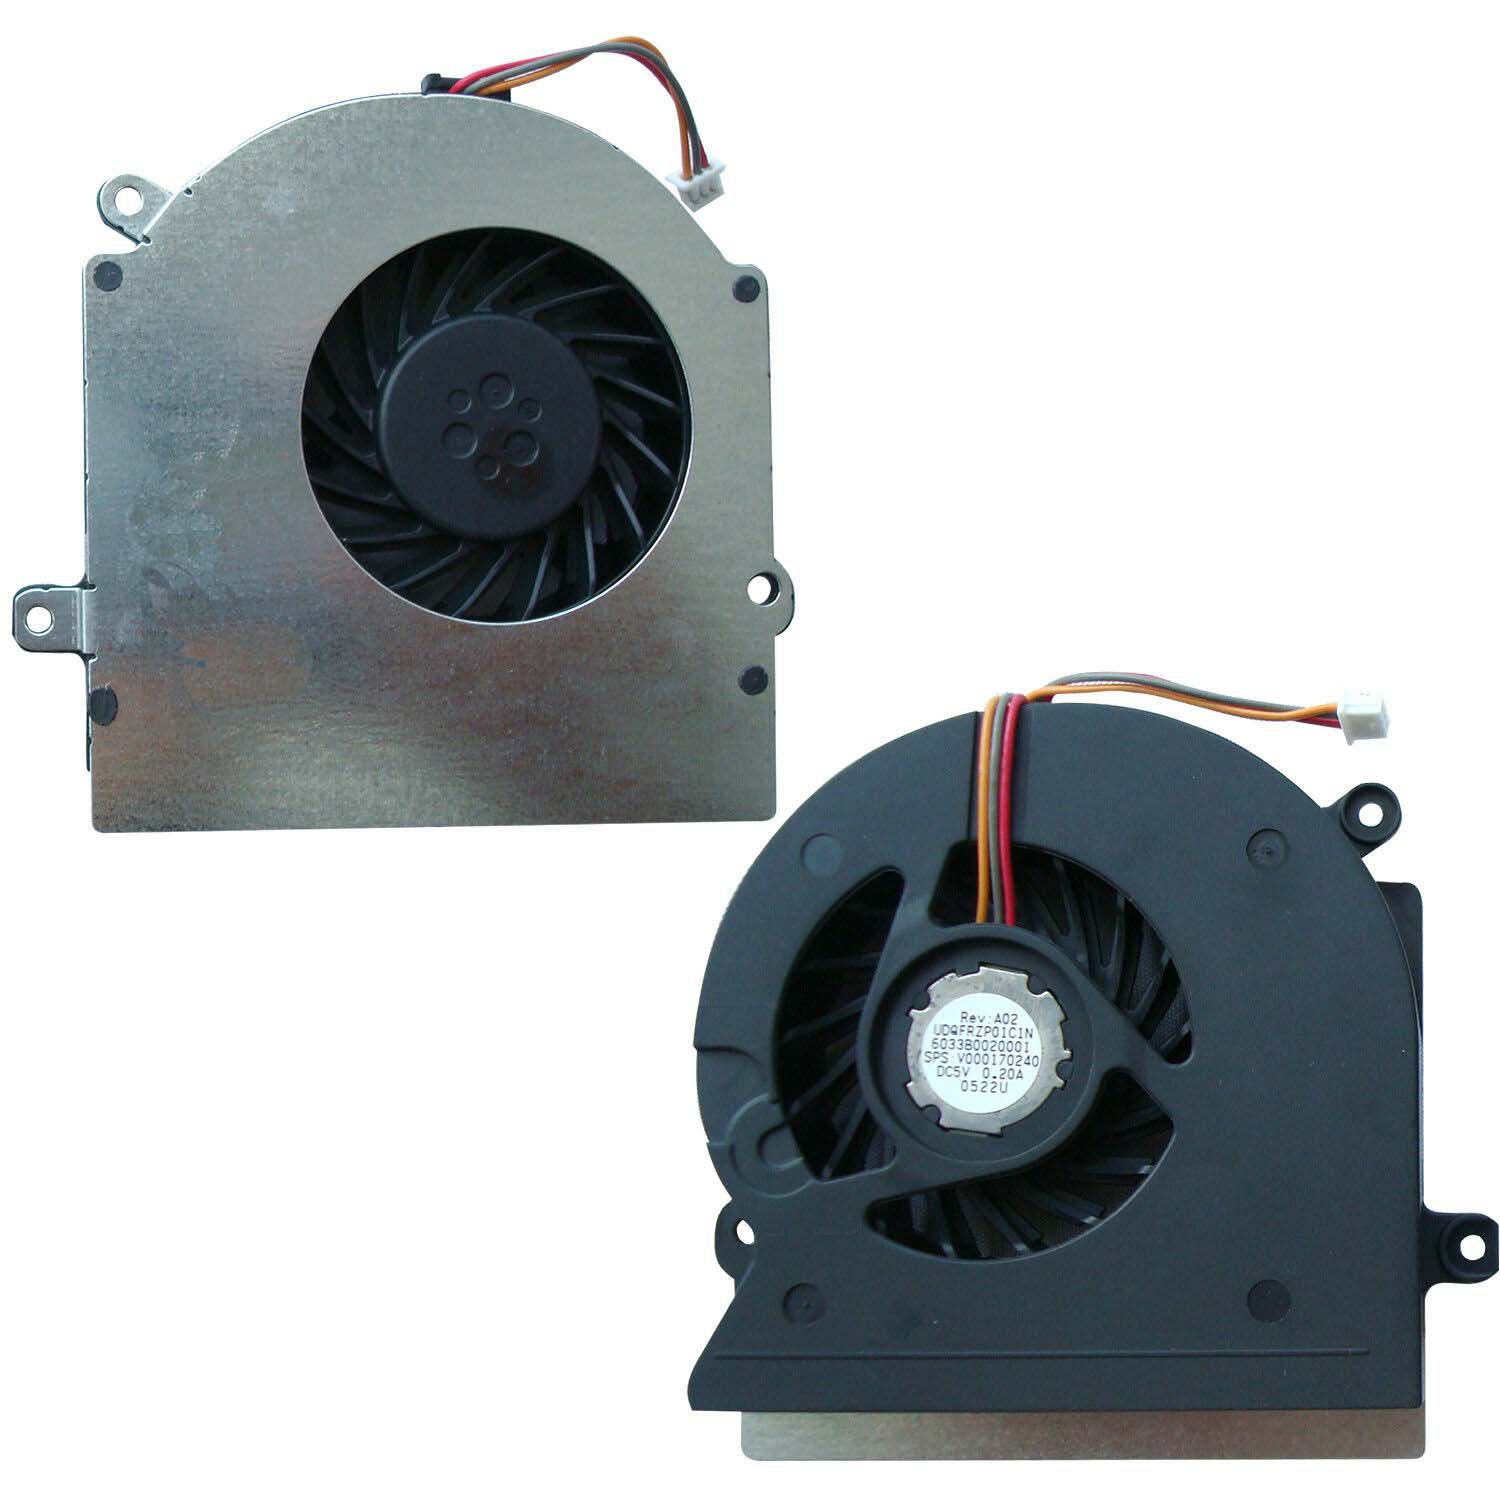 V000170240 for Toshiba Satellite L505 L505D A505 A505D CPU Cooling Fan